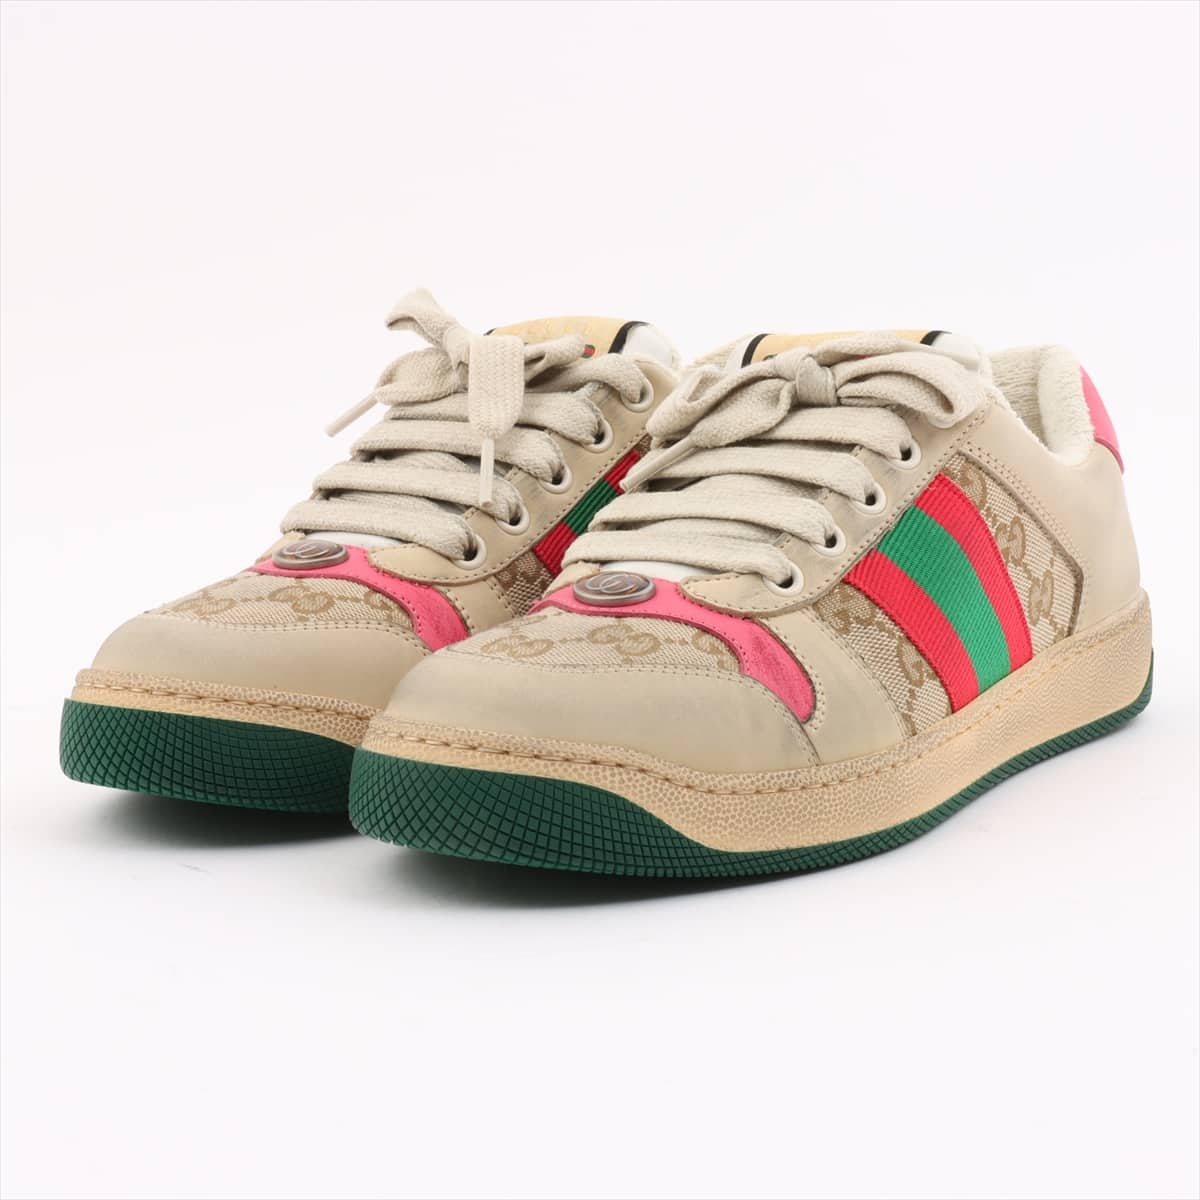 Gucci Screener Canvas & leather Sneakers 36 Ladies' Beige×Pink GG Canvas Vintage processing